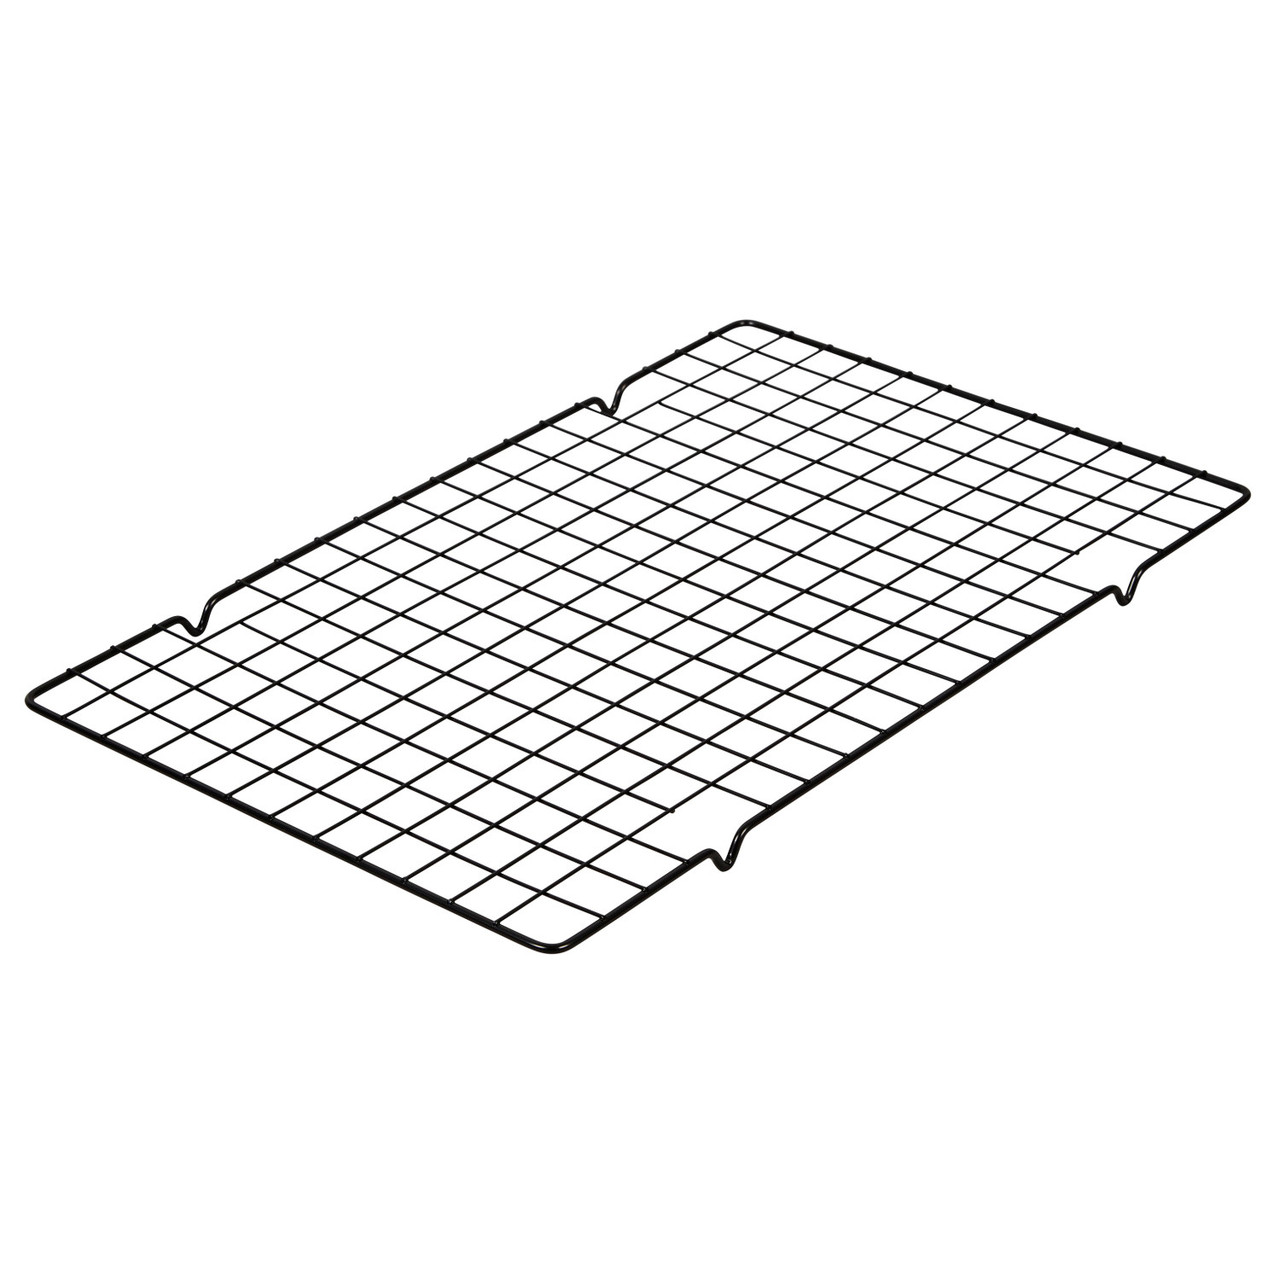 What Type of Cooling Rack Should I Buy?